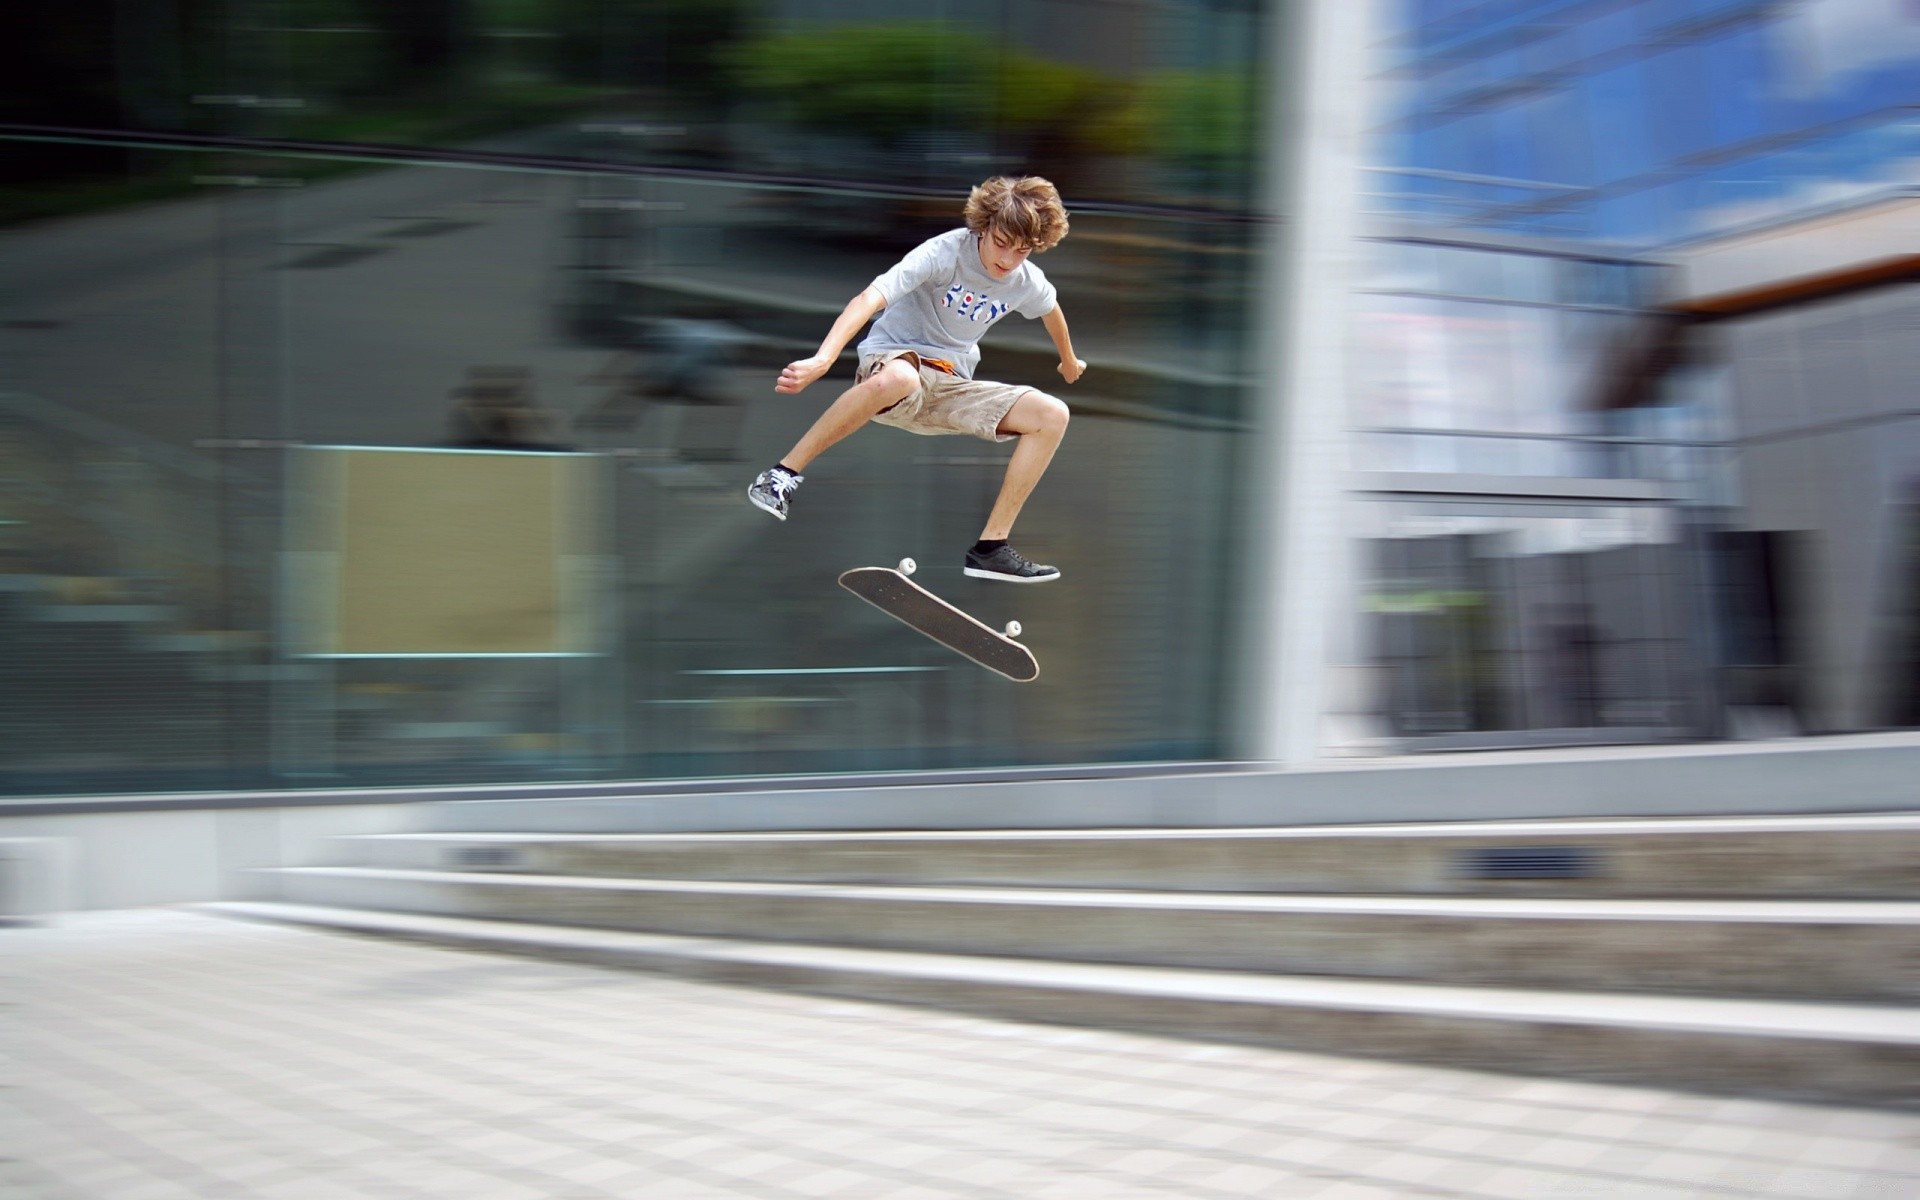 skateboarding blur hurry motion fast action street road adult competition transportation system speed rush city outdoors